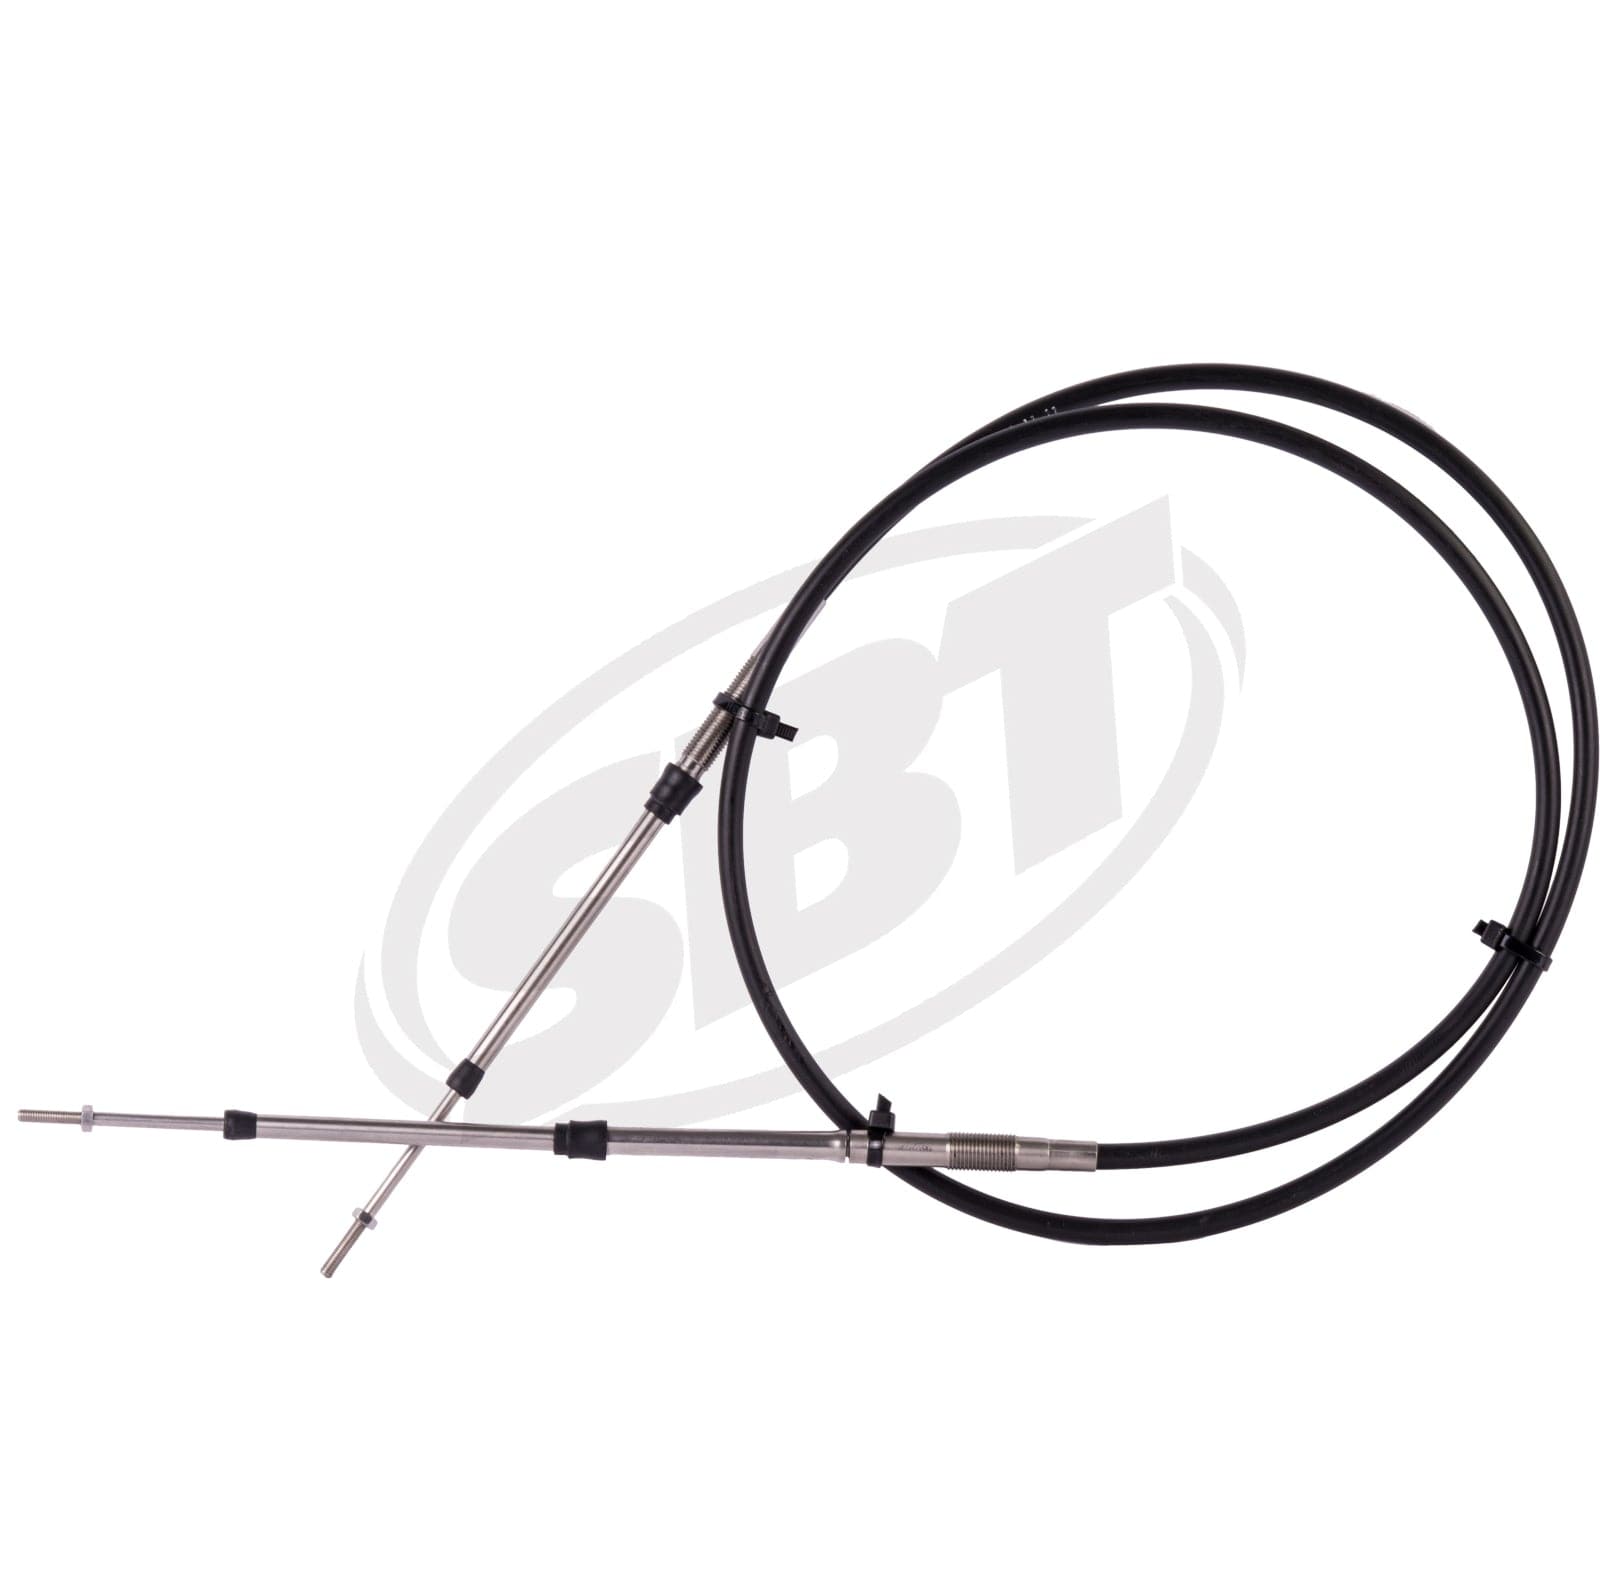 SBT Steering Cable XP 800 277000491 1995